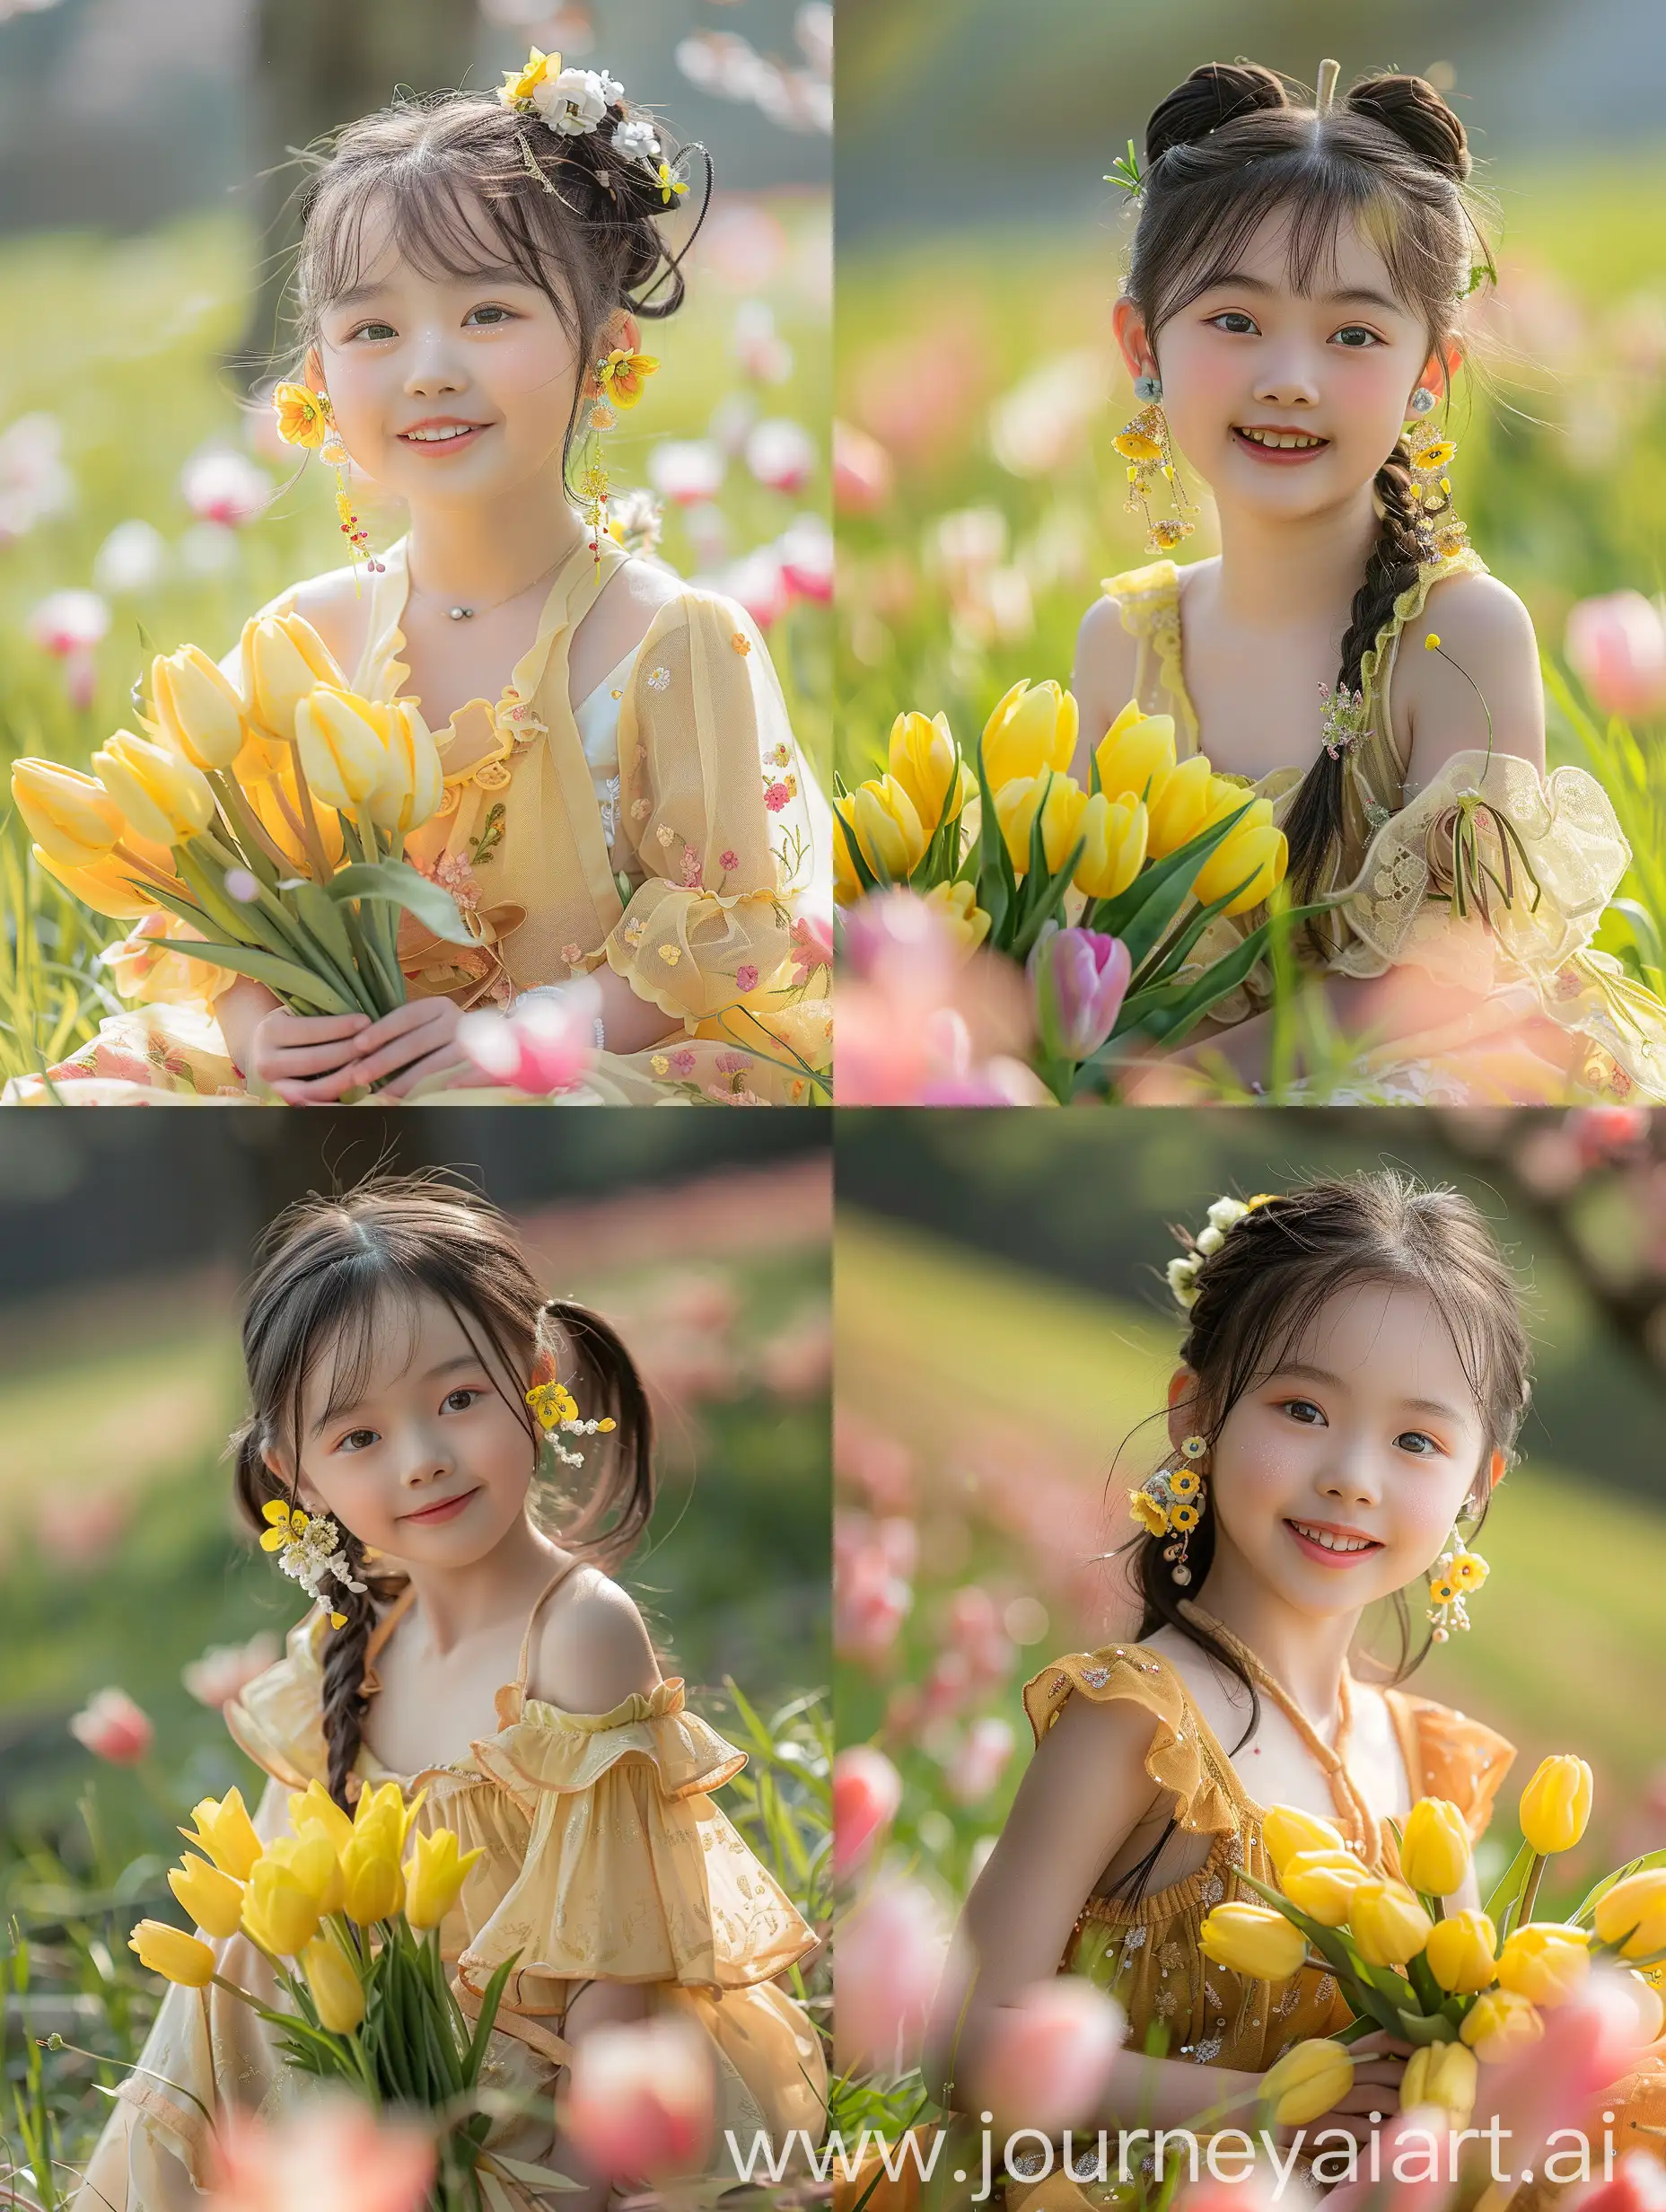 Cheerful-Chinese-Girl-with-Yellow-Tulips-in-a-Blooming-Meadow